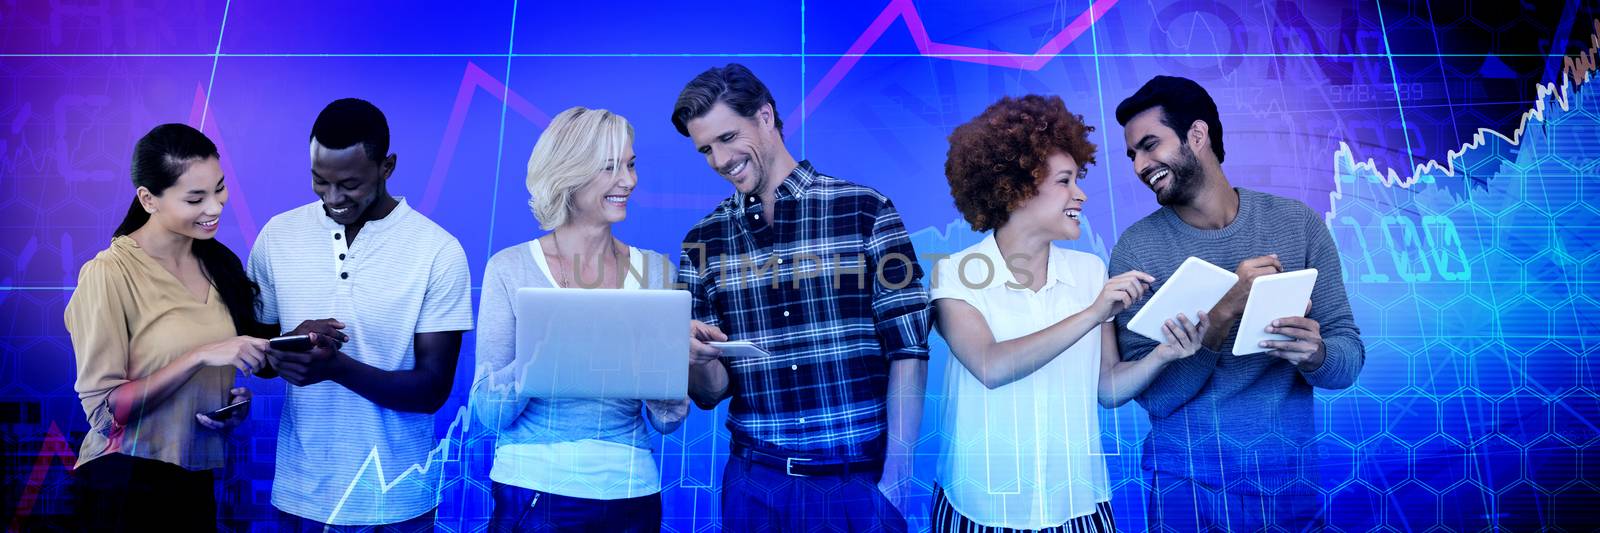 Composite image of smiling business people using technology against white background by Wavebreakmedia